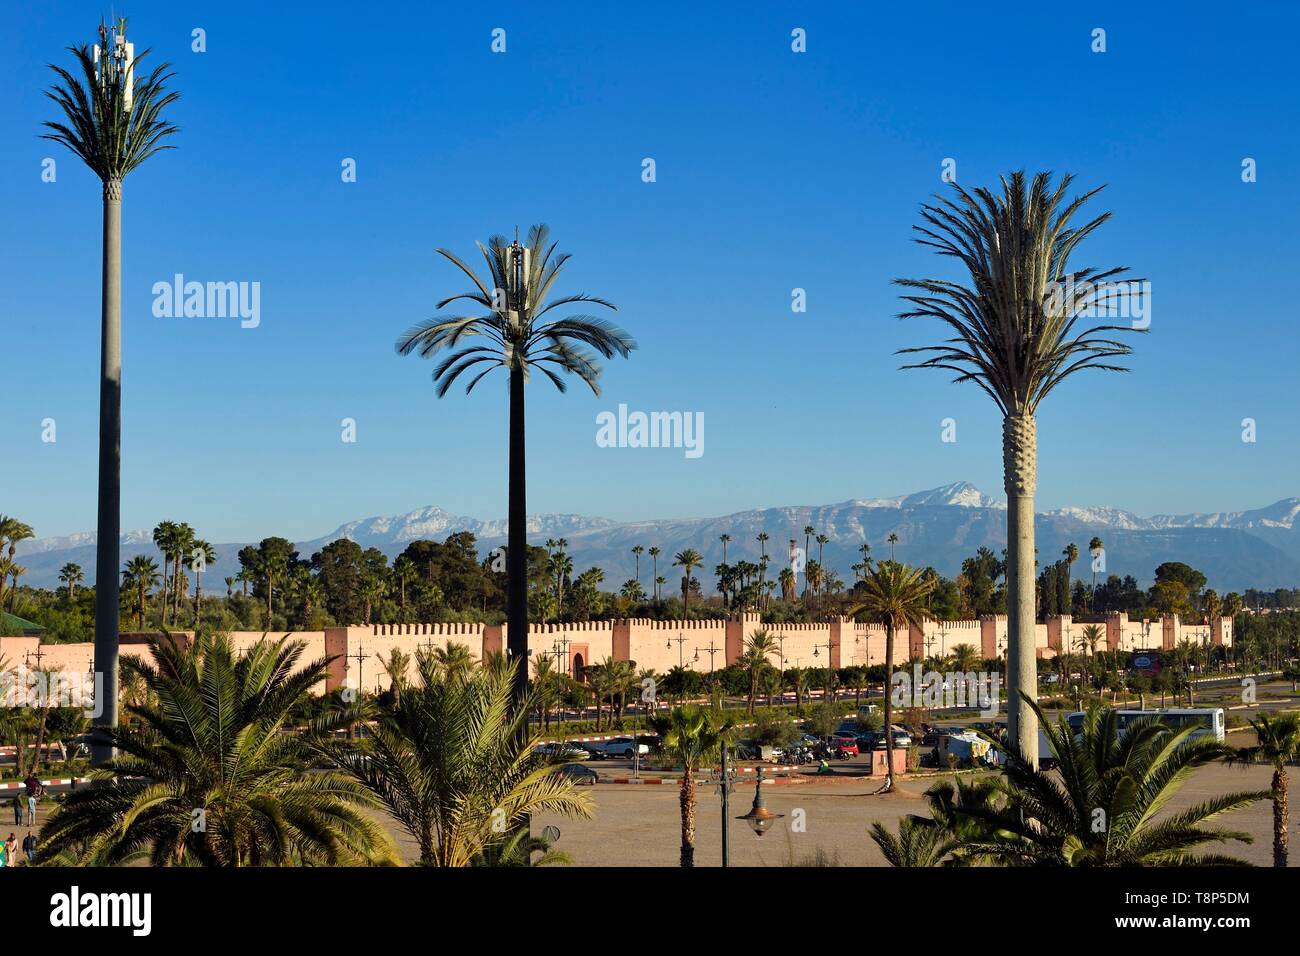 Morocco, High Atlas, Marrakech, Imperial city, Medina listed as World Heritage by UNESCO, the ramparts of the city and the snow-covered Atlas in the background, three cell phone relay antennas concealed in fake palm trees Stock Photo